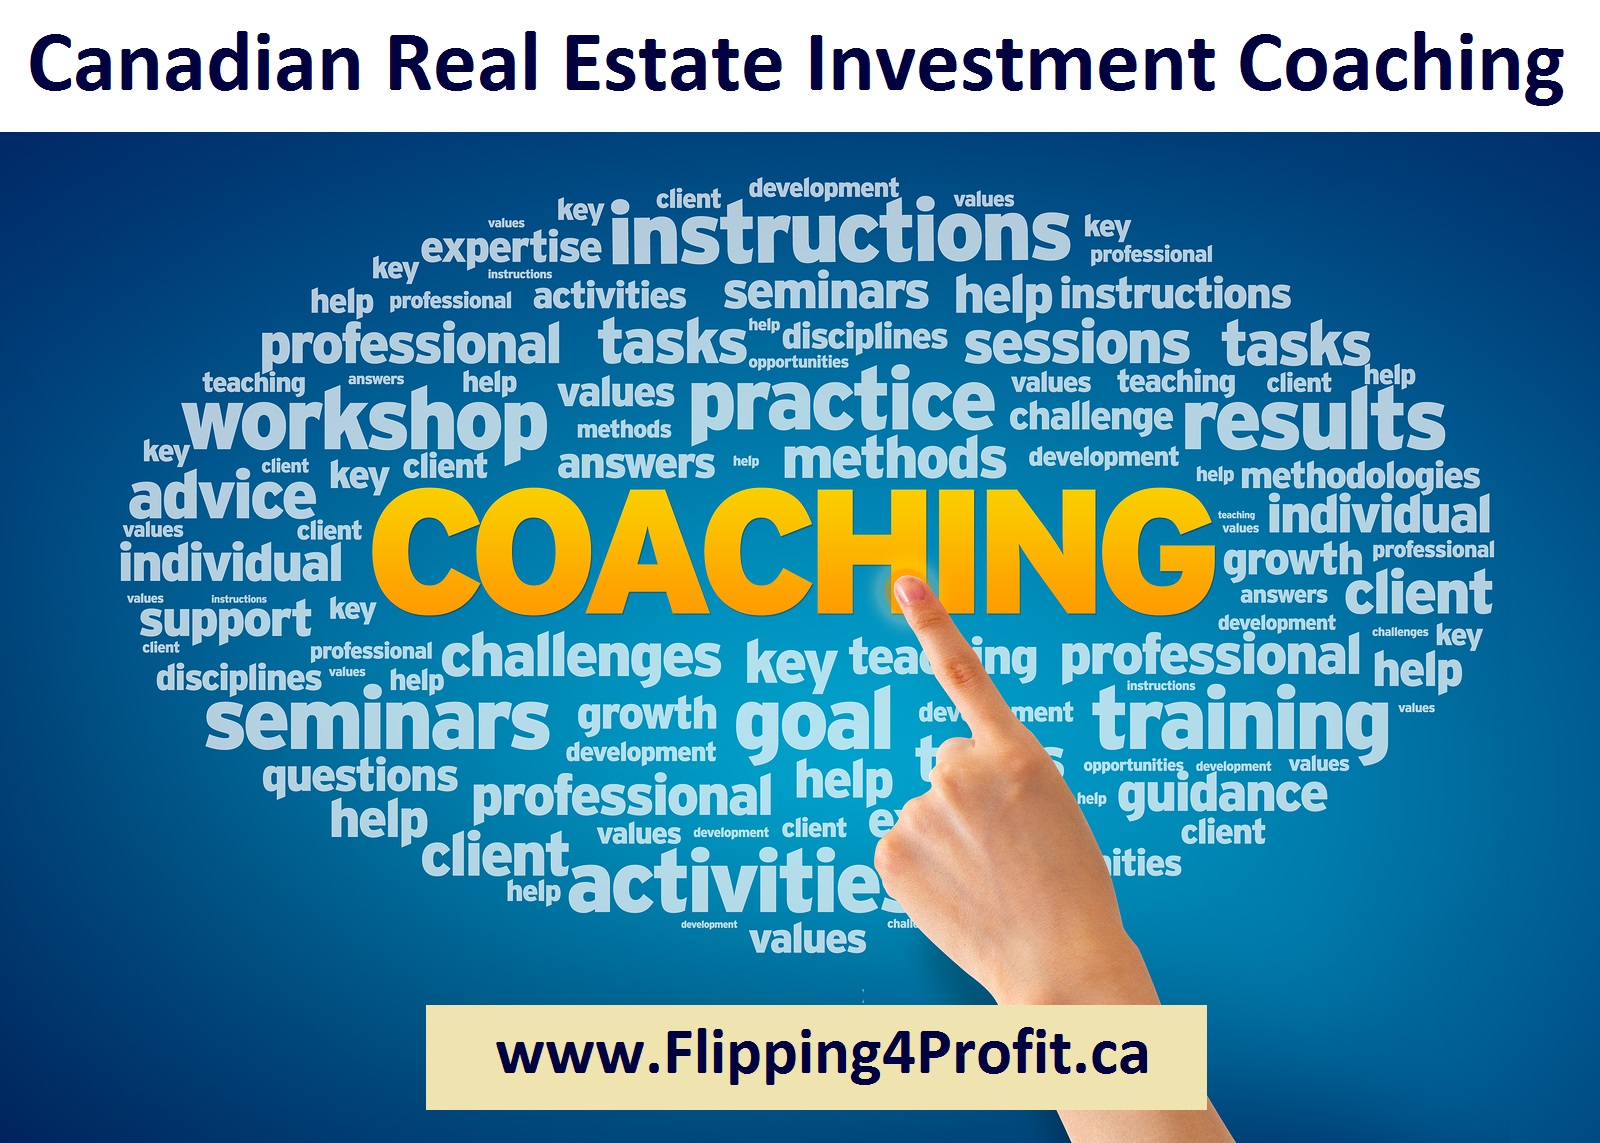 Canadian Real Estate Investment Coaching